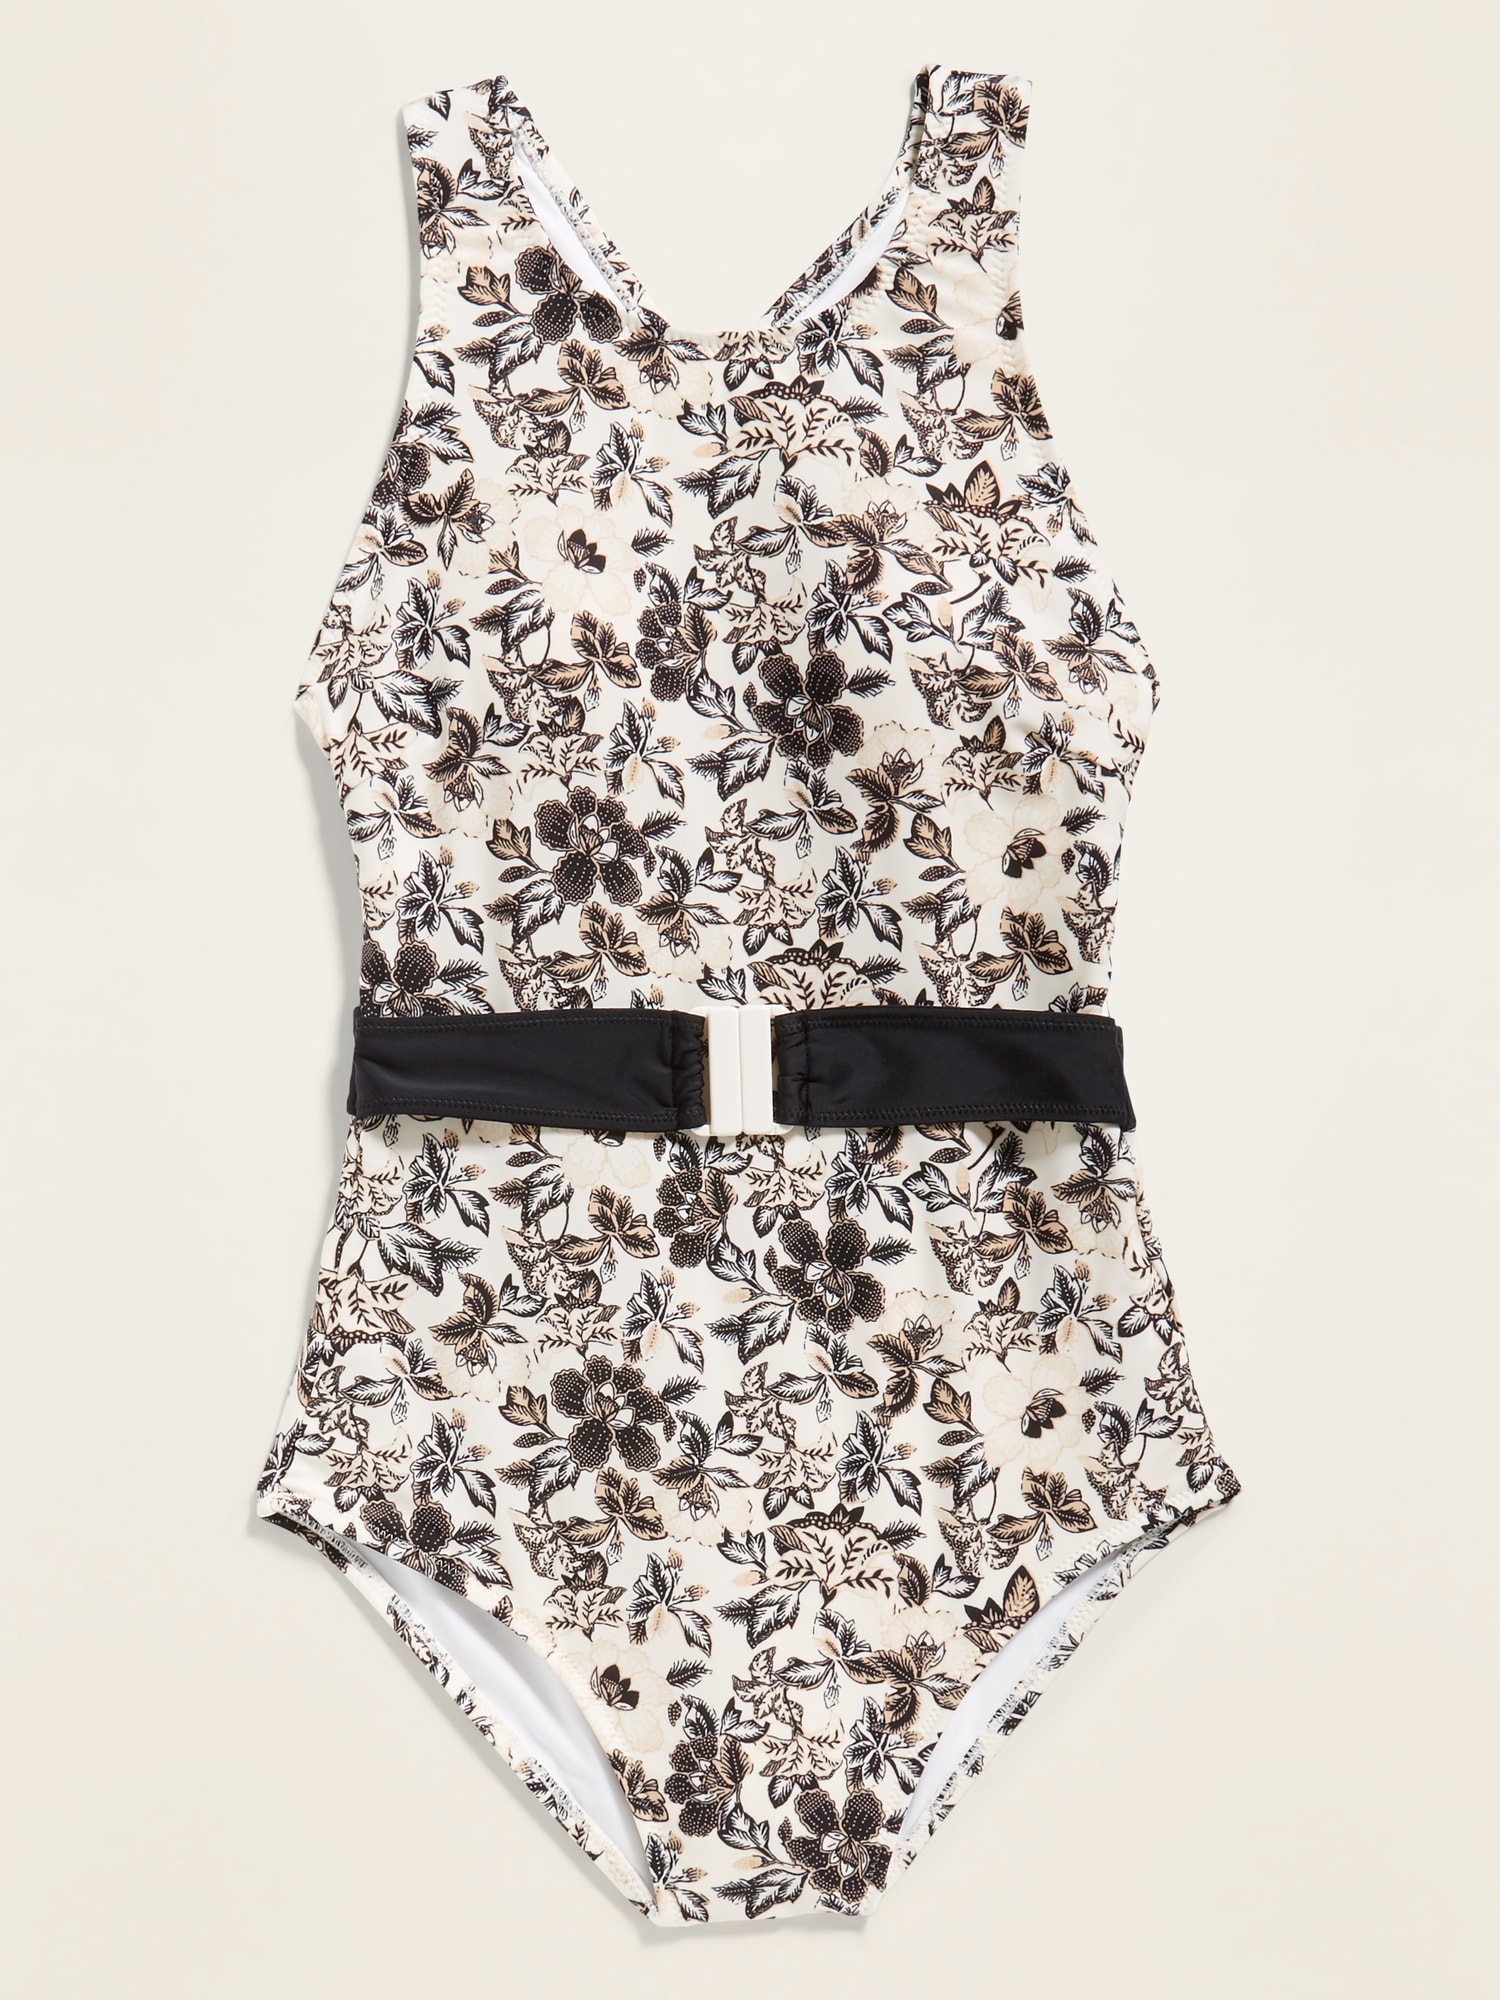 High-Neck Printed One-Piece Belted Swimsuit for Women